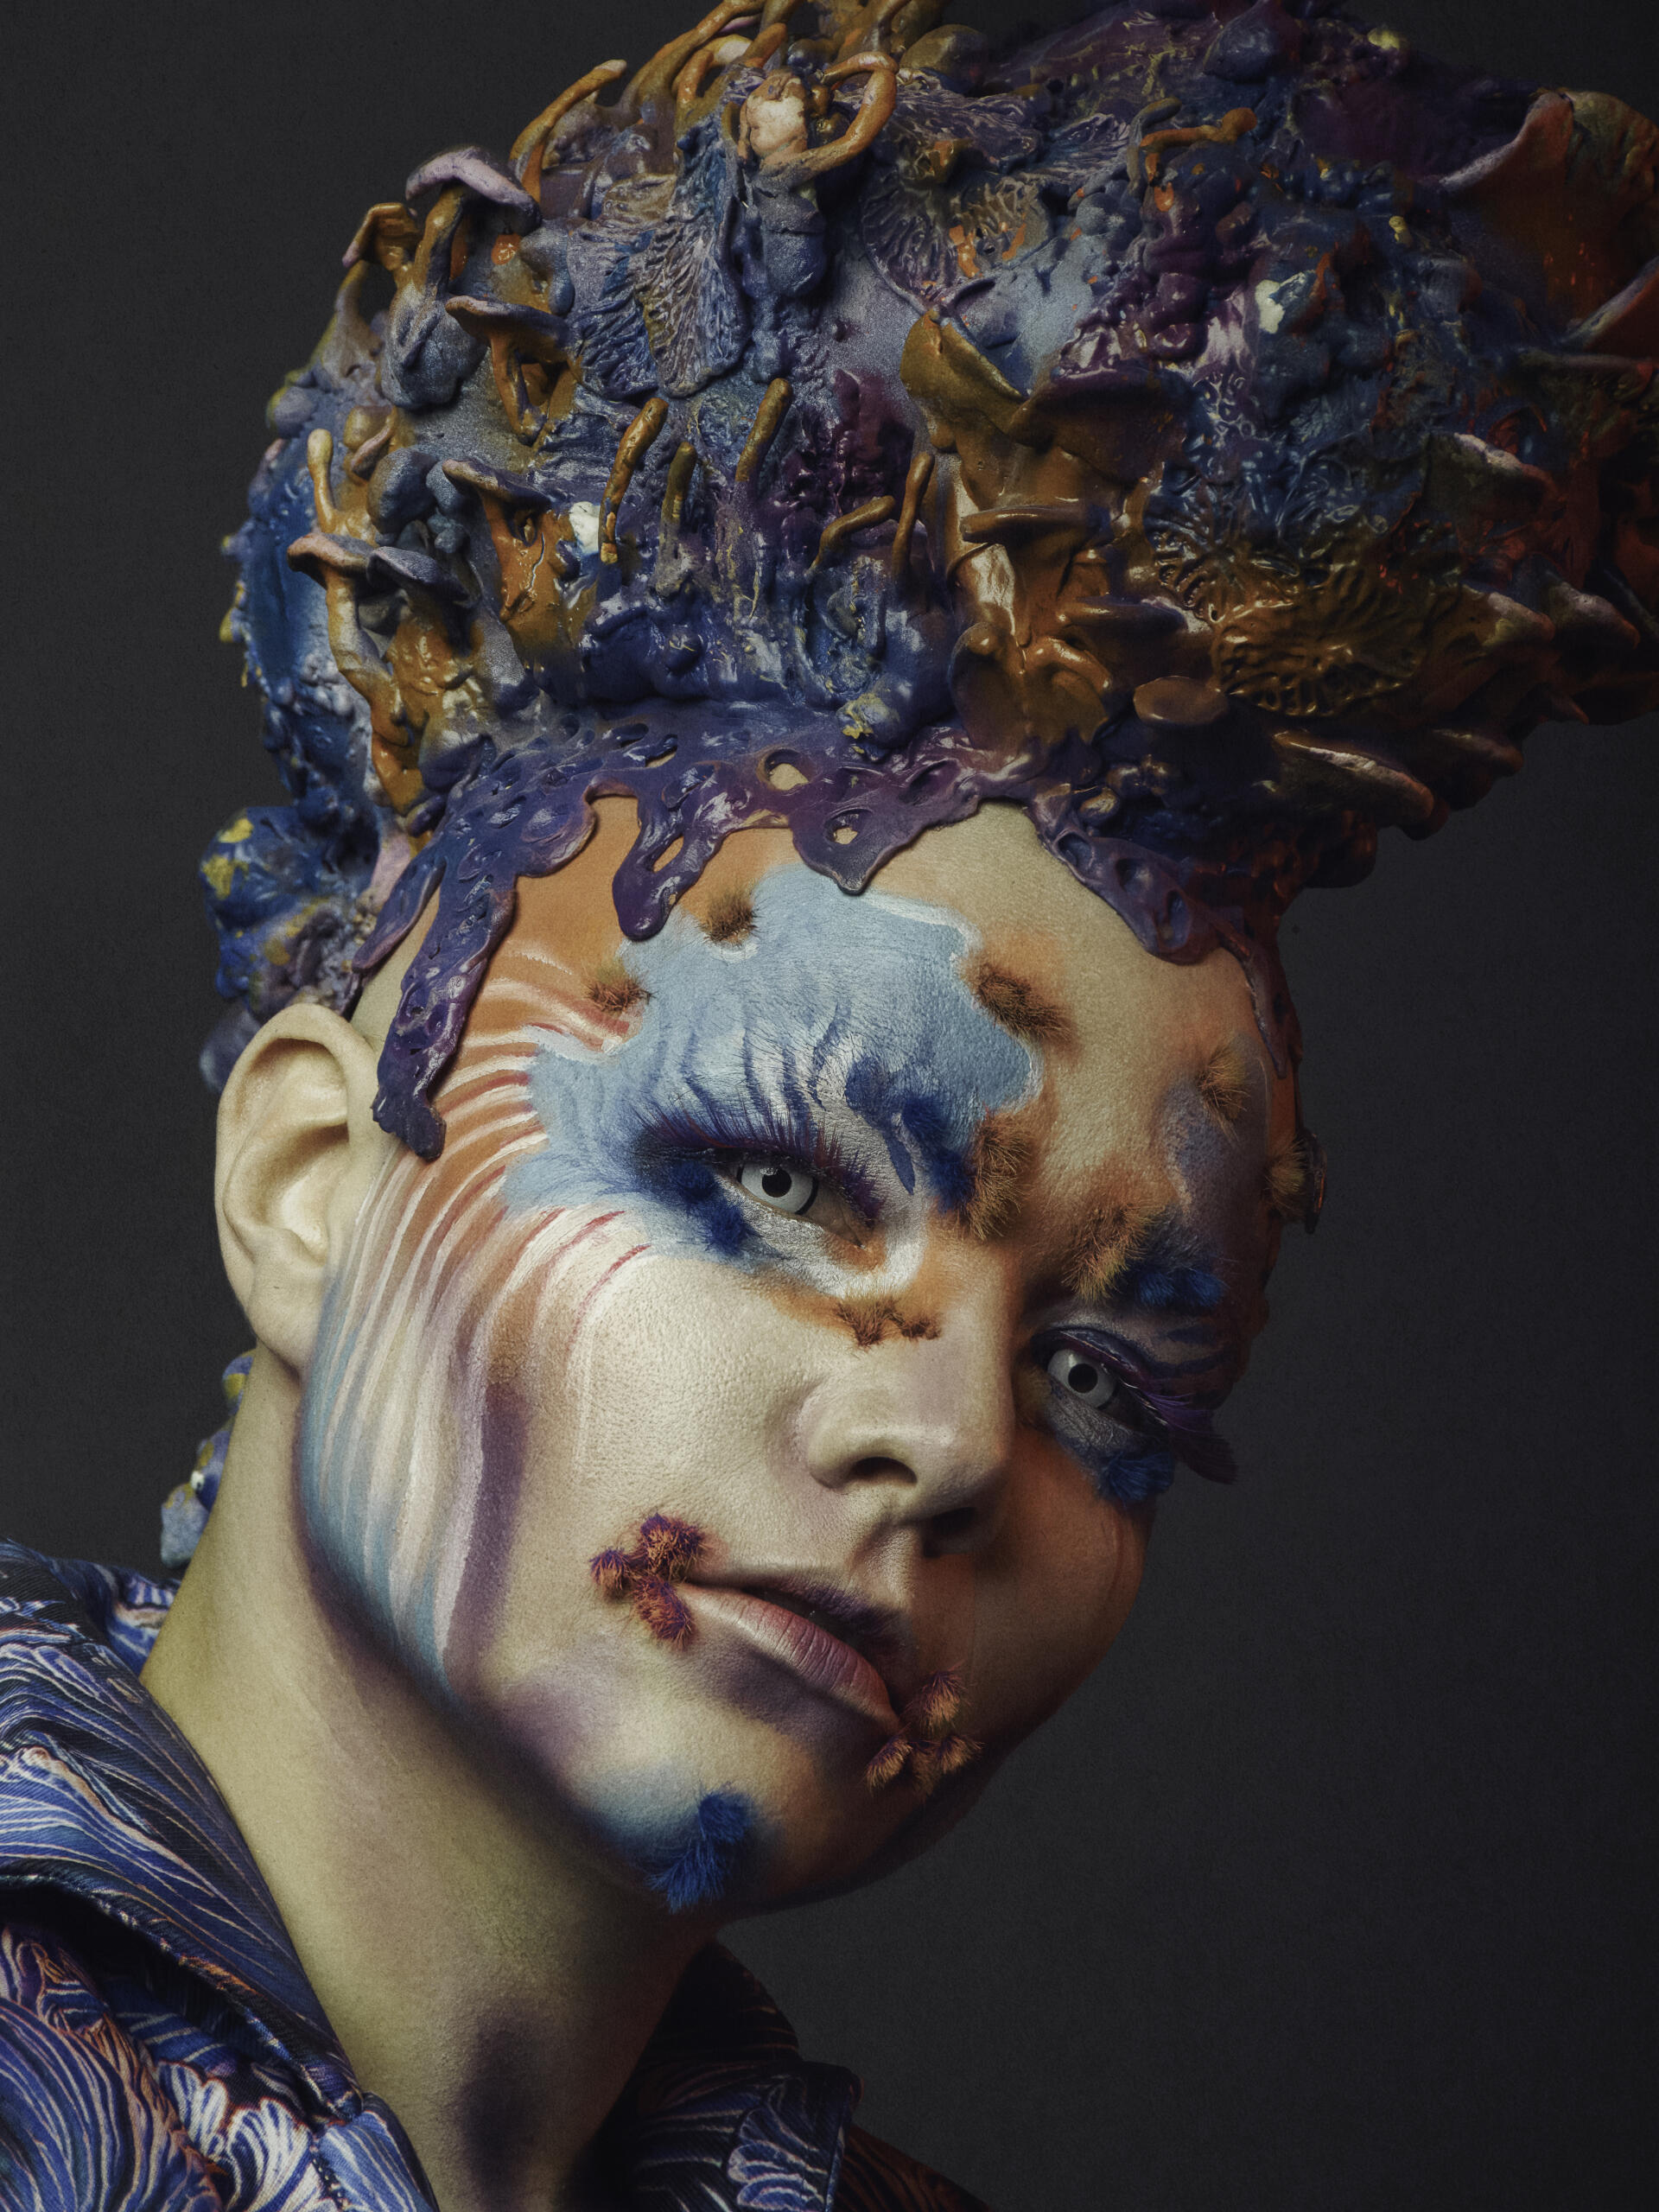 Portrait with colourful make-up and an artistic hairstyle.